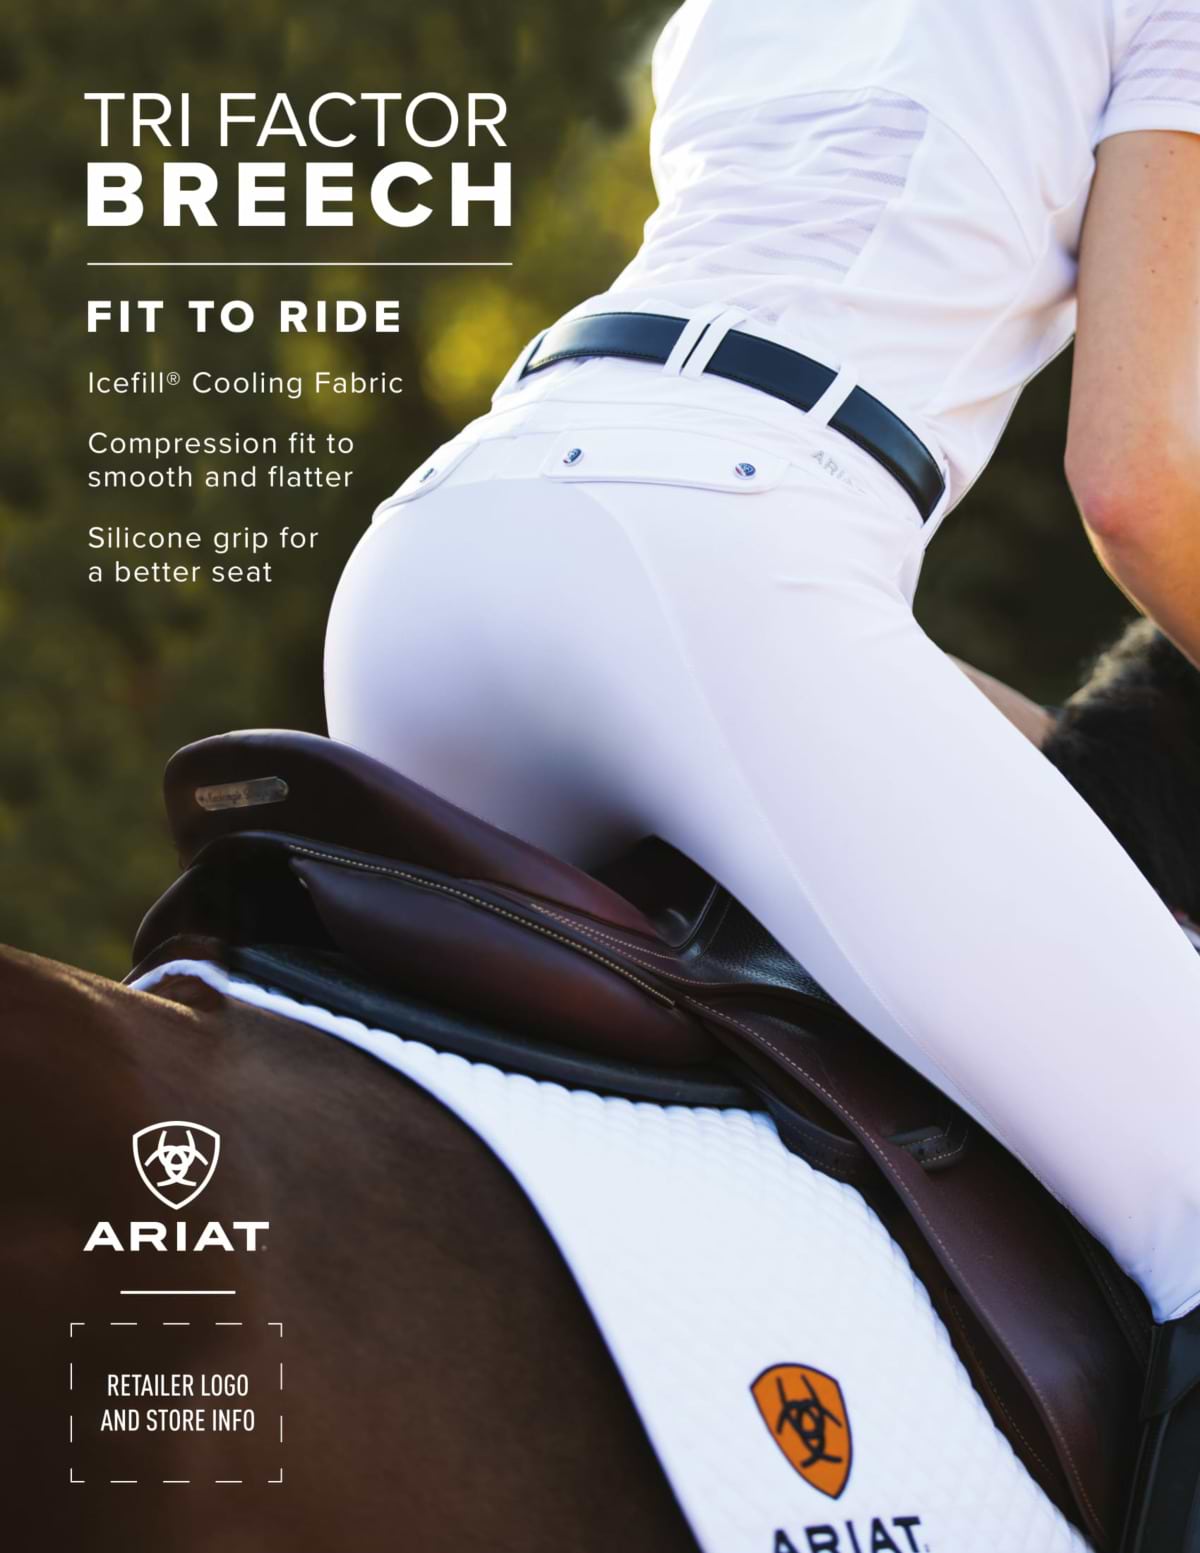 Review on Ariat Tri-Factor Navy Breeches by Charlotte Pellow